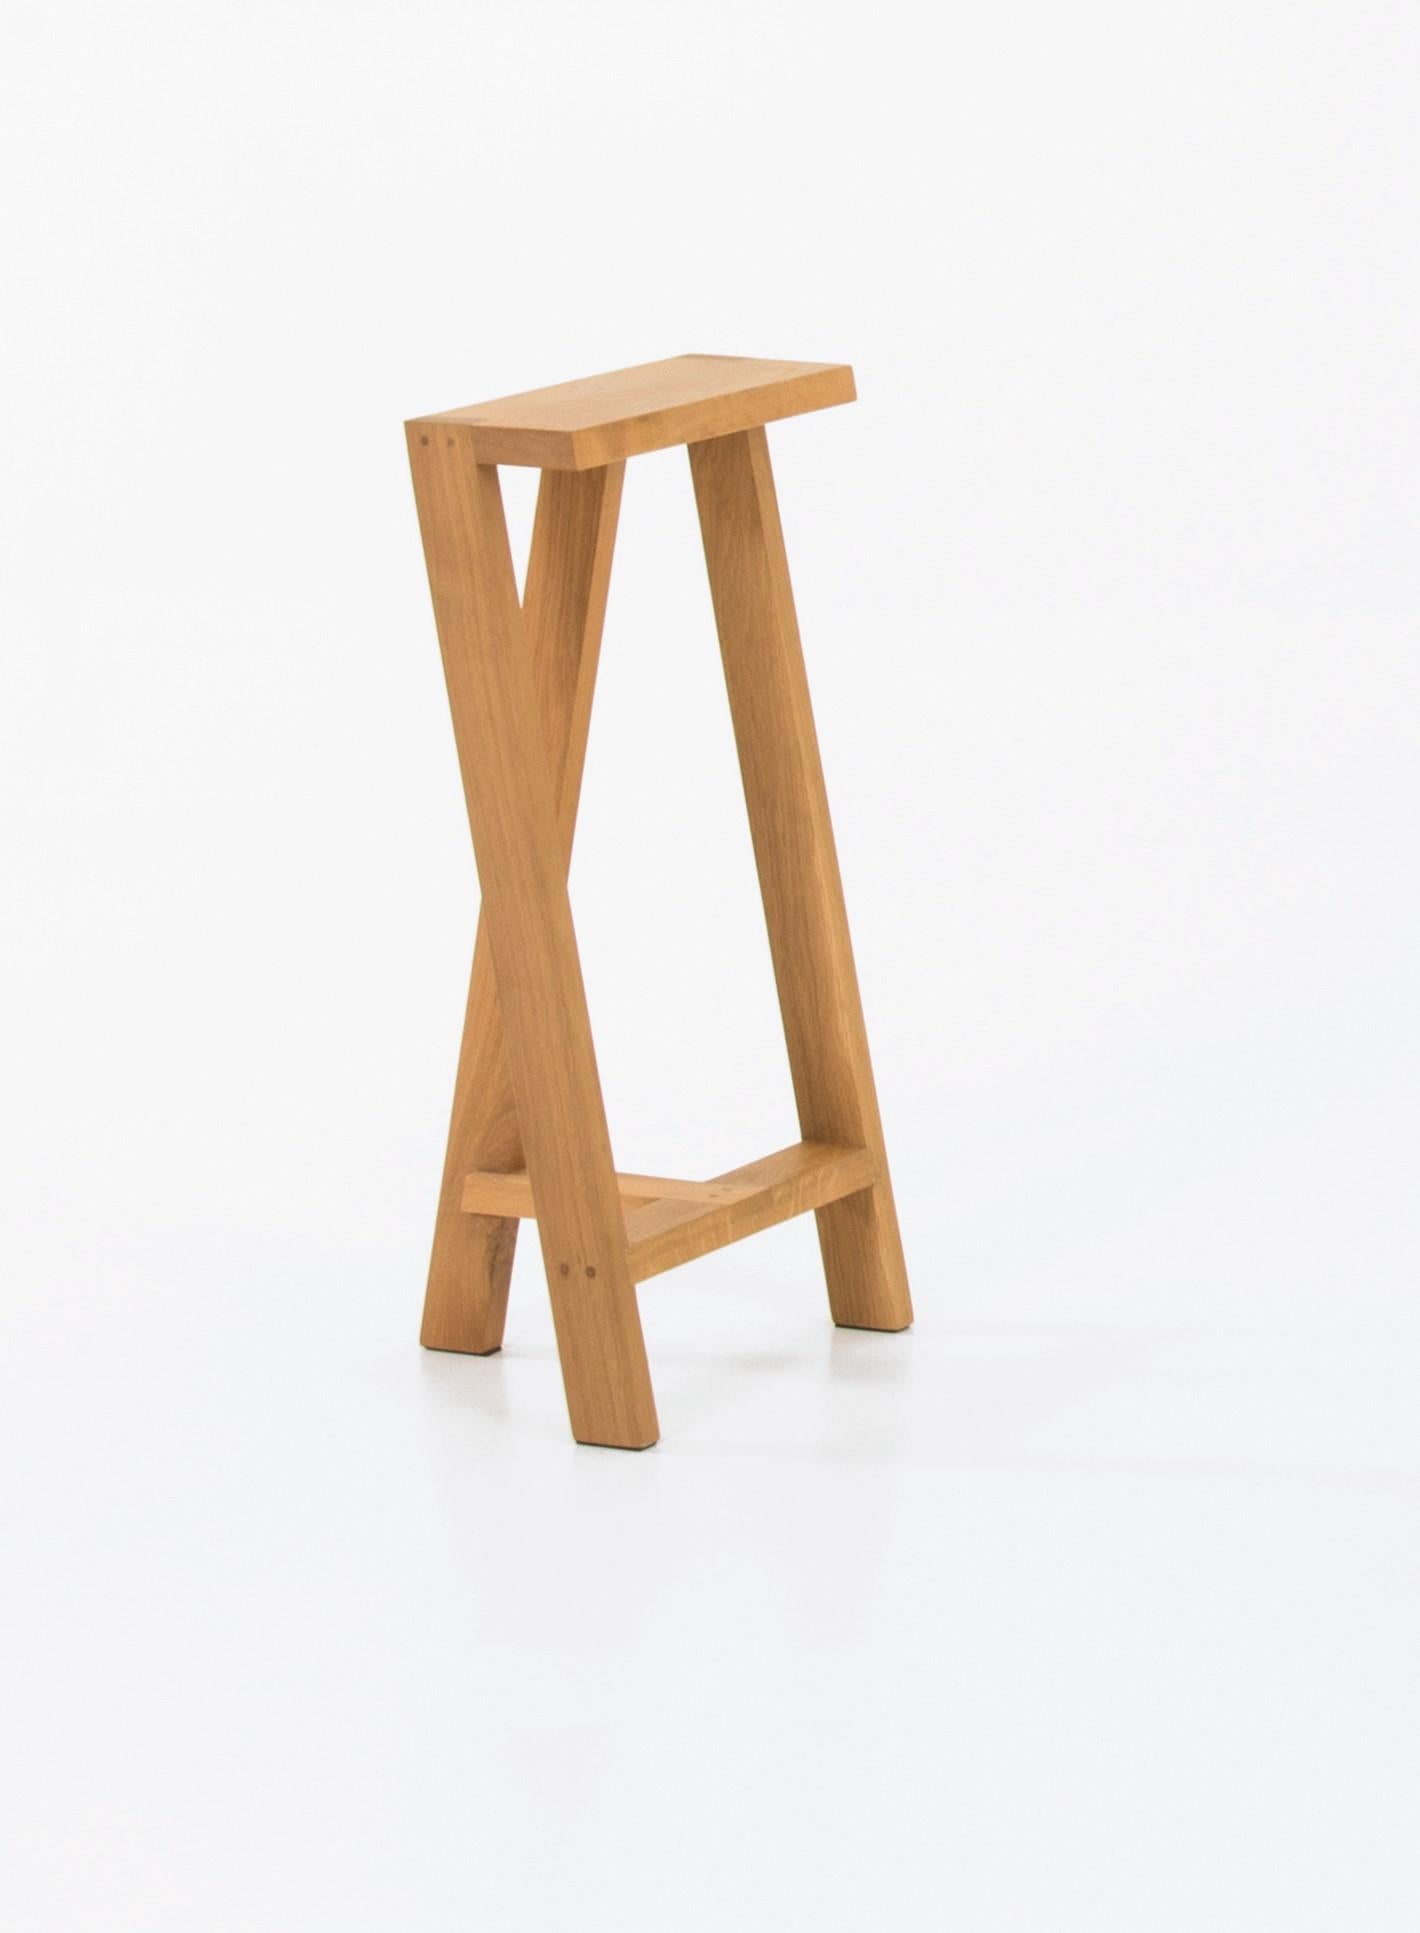 Set of 4 Medium Pausa oak stool by Pierre-Emmanuel Vandeputte
Dimensions: D 27 x W 35 x H 65 cm
Materials: oak wood
Available in burnt oak version and in 3 sizes

Pausa is a series of stools; 45cm, 65cm, or 80cm of assembled oak pieces. 
The